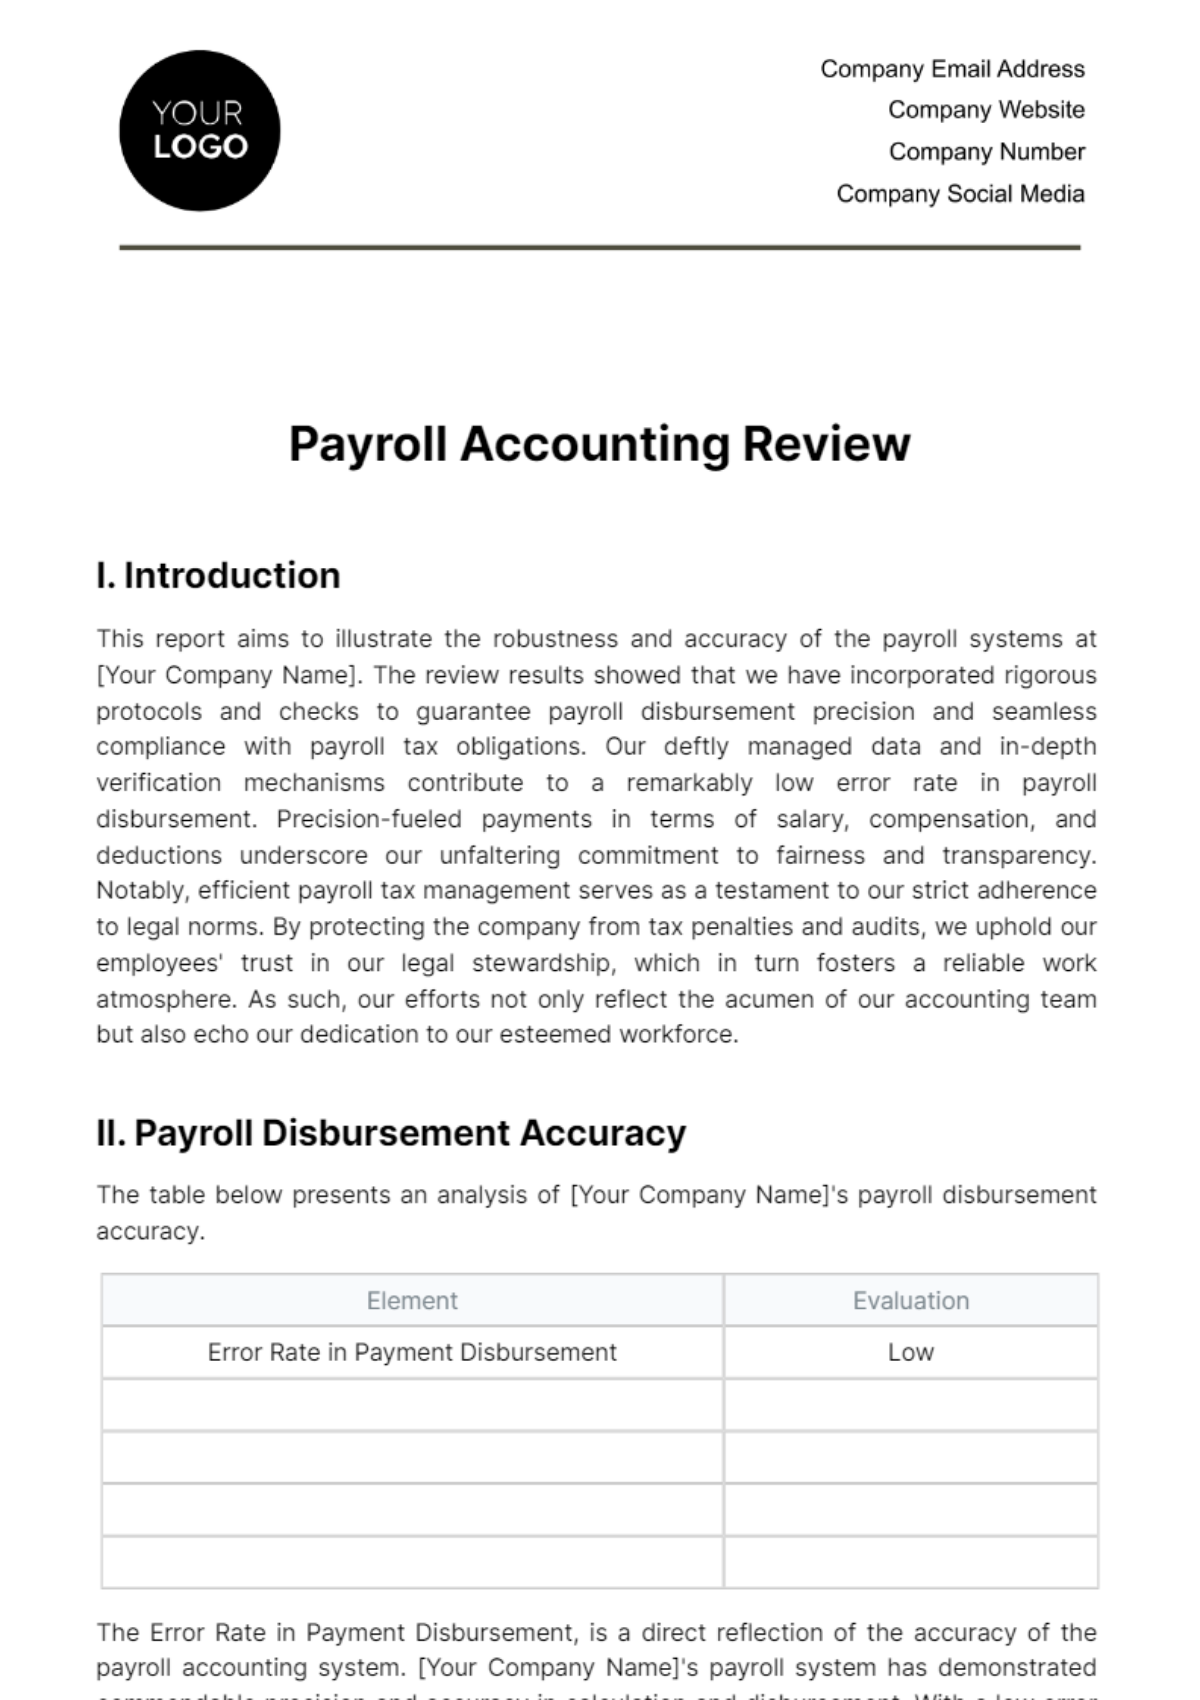 Free Payroll Accounting Review Template